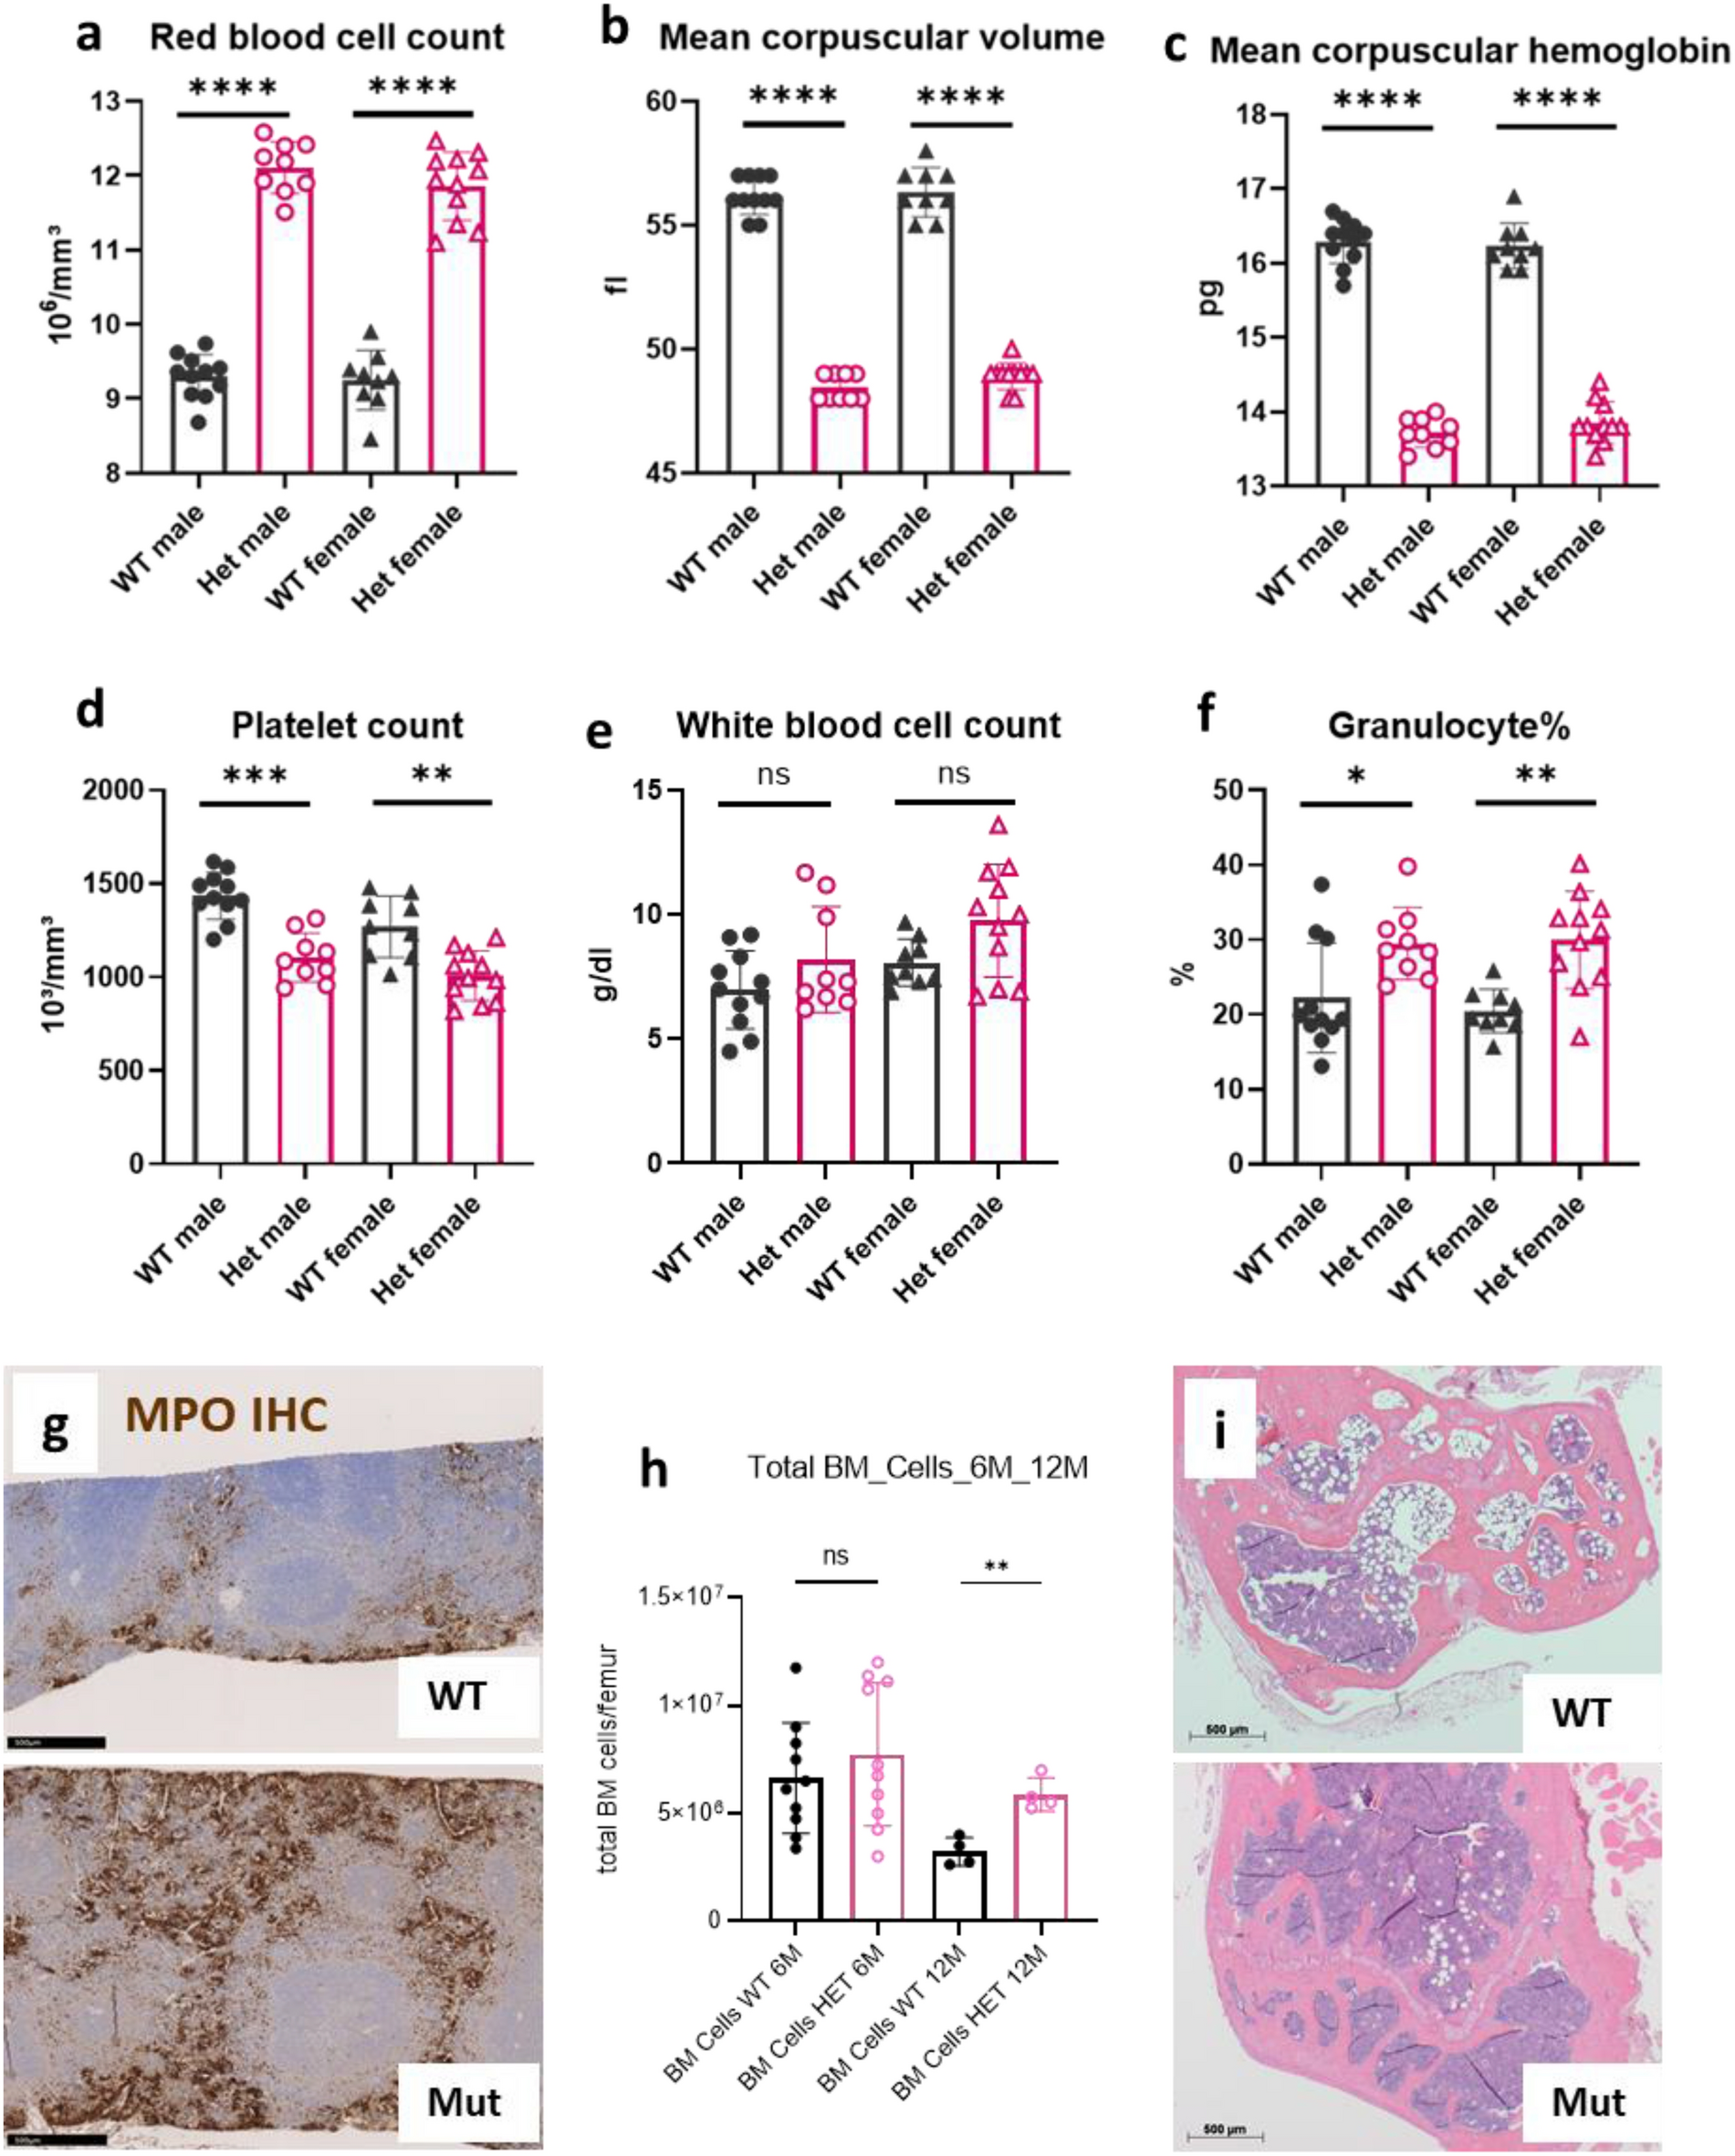 New C3H KitN824K/WT cancer mouse model develops late-onset malignant  mammary tumors with high penetrance | Scientific Reports